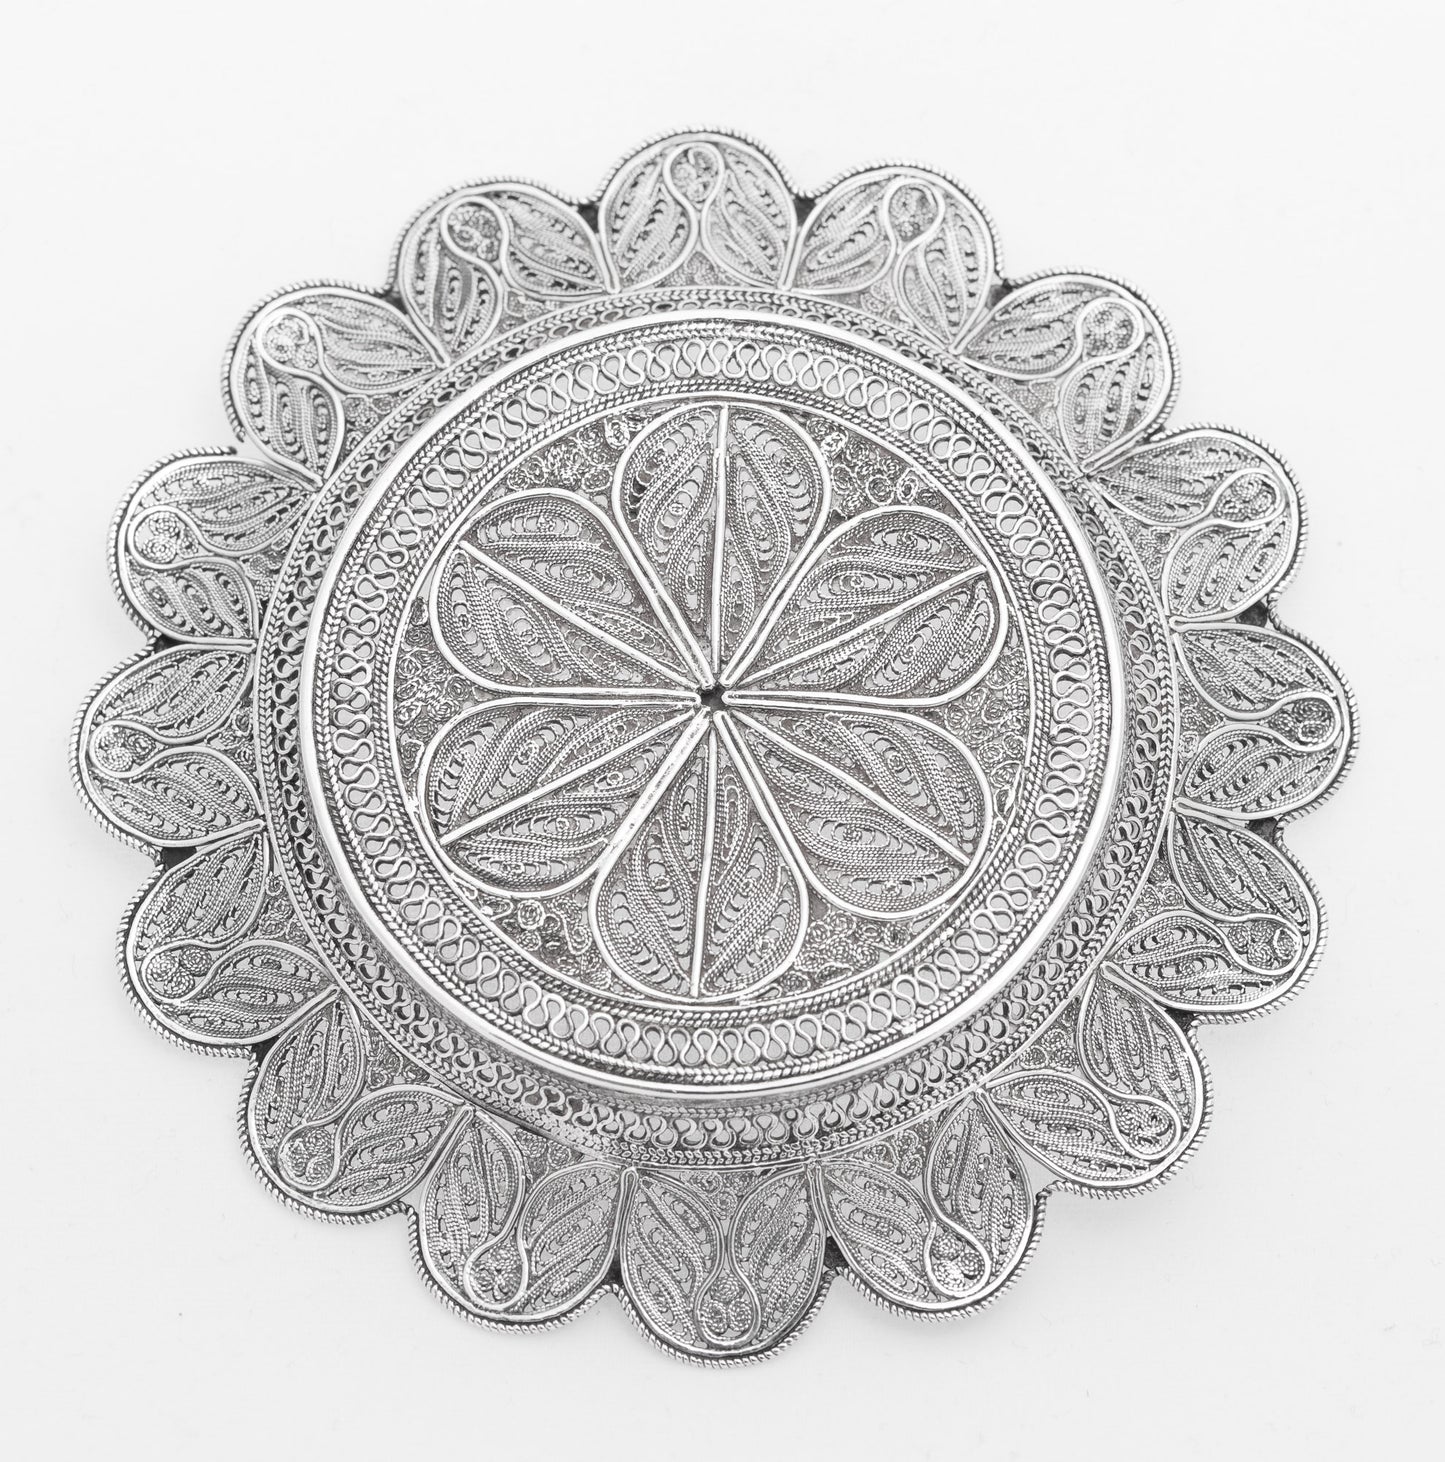 Pair Antique Fine Quality Silver Filigree Coasters/Dishes Turkish/Middle Eastern c1920 (3096)